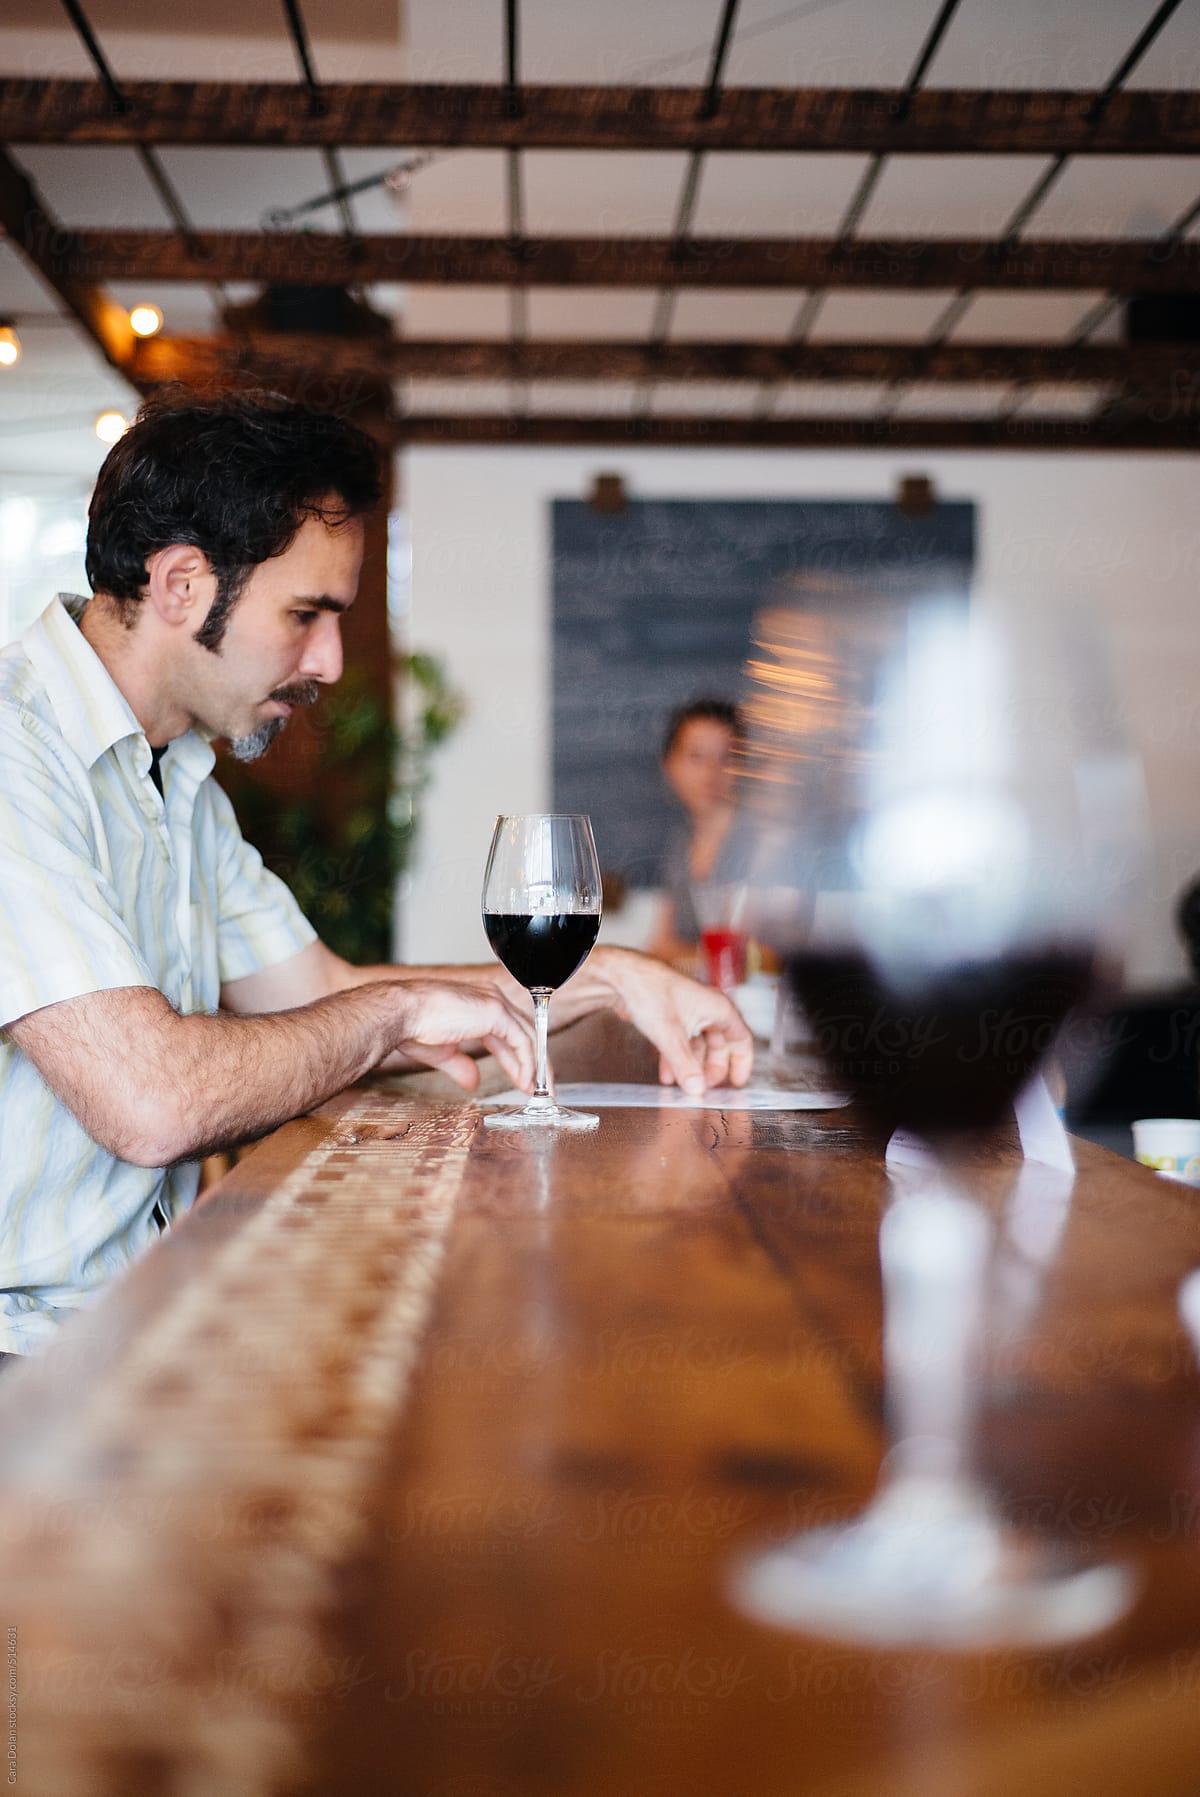 Man with glass of red wine looks at menu in a restaurant